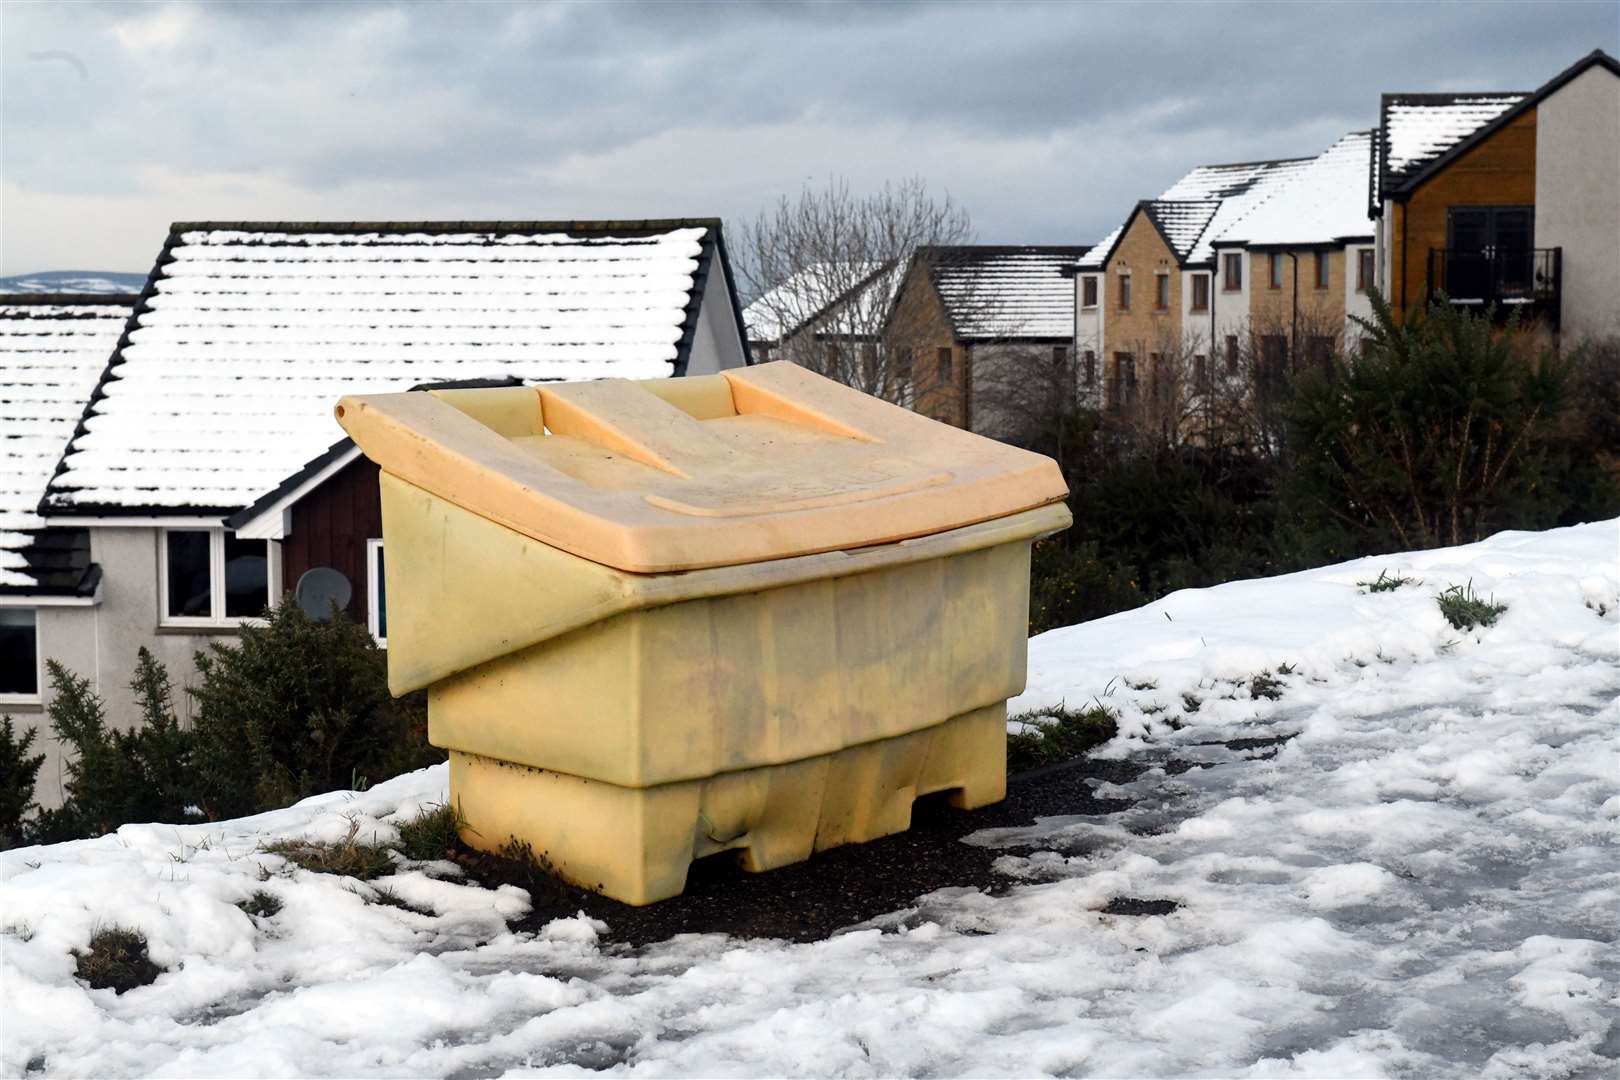 Grit bins in Inverness tend to be yellow boxes in accessible locations. Picture: James Mackenzie